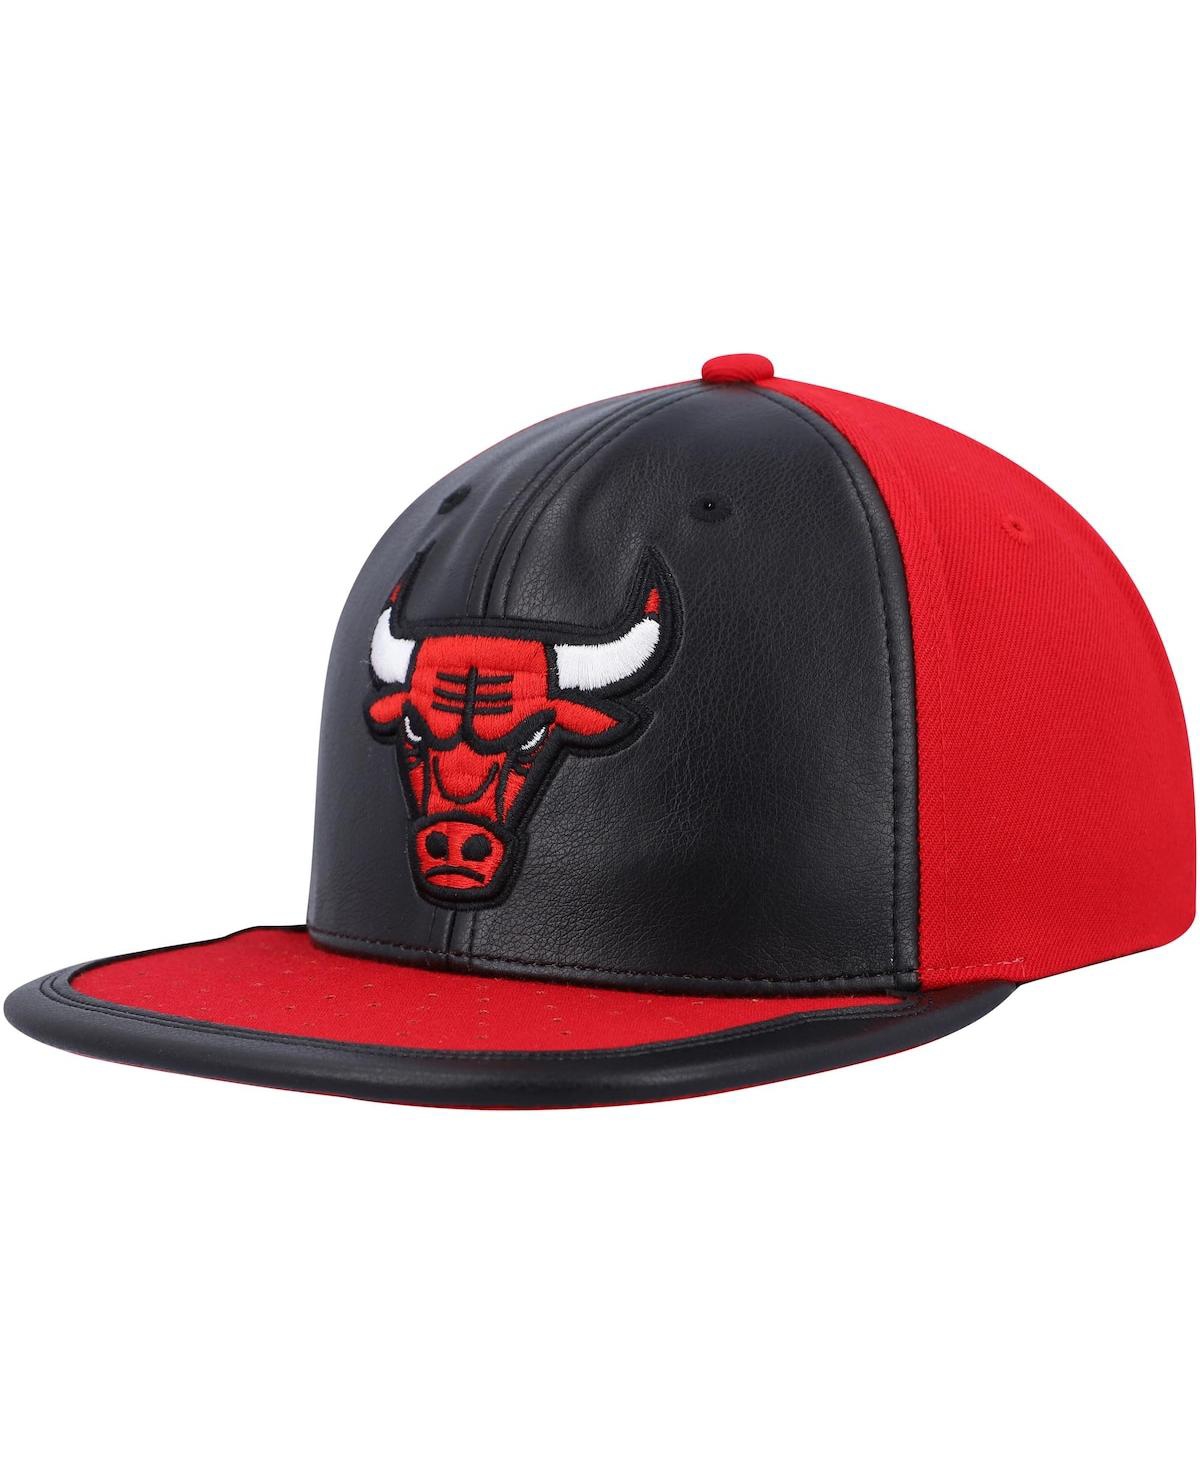 Under Armour Men's Mitchell & Ness Black, Red Chicago Bulls Day One Snapback Hat In Black,red